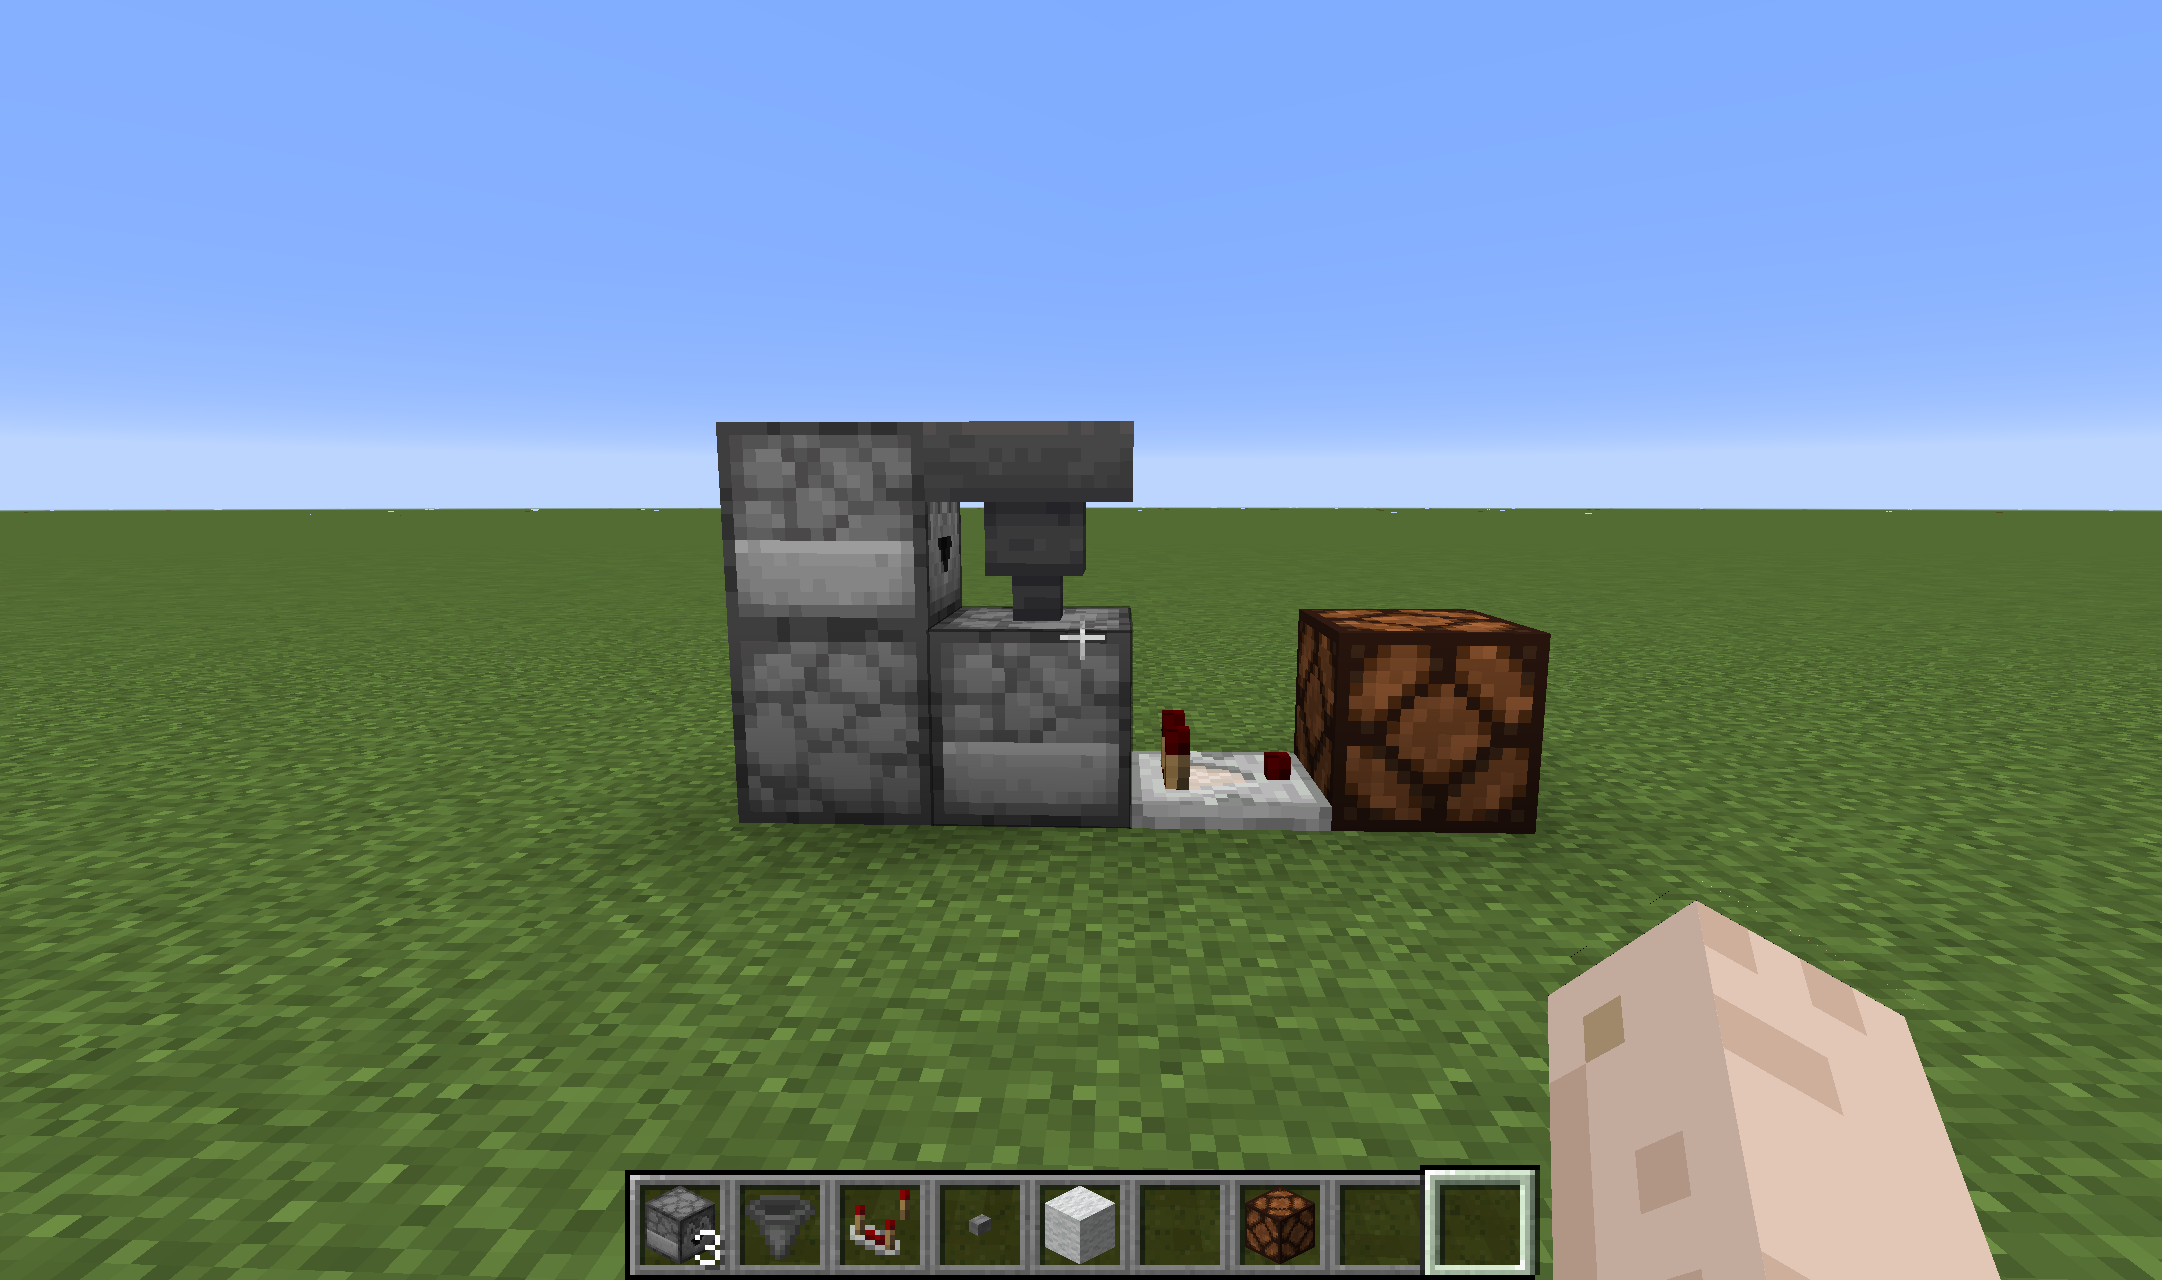 How to make a Toggle Switch in Minecraft